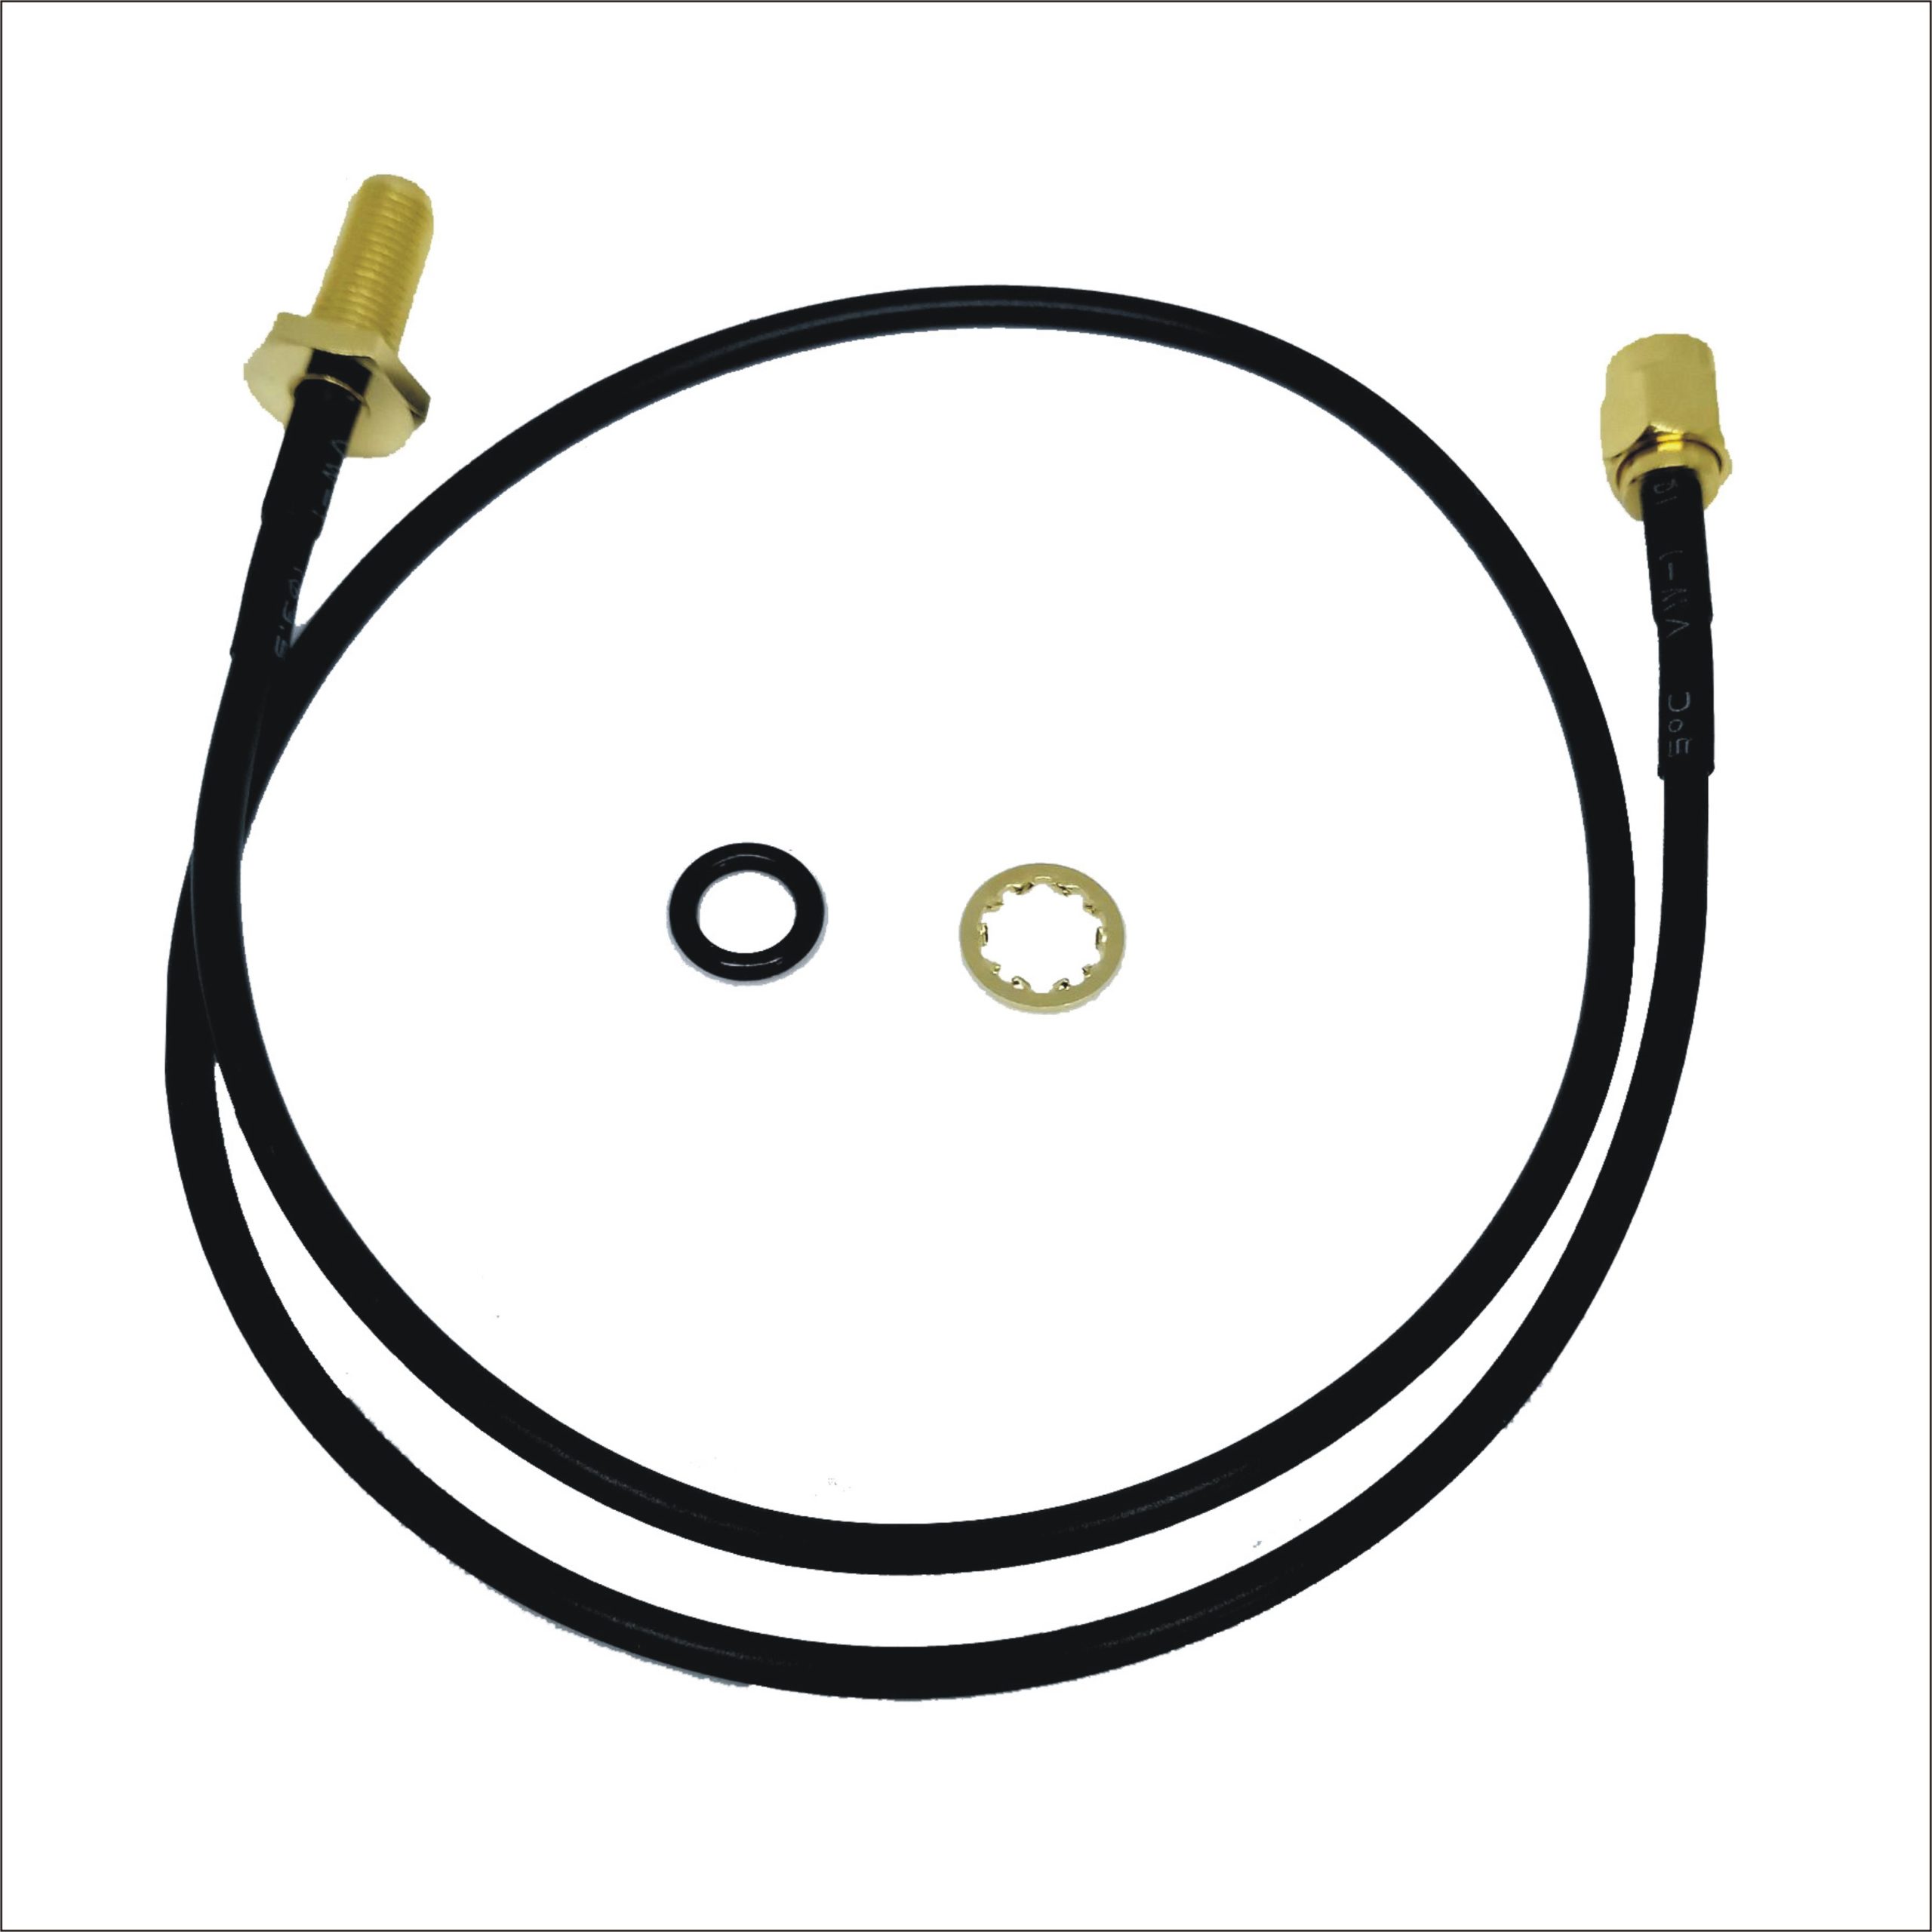 SMA R/P JACK TO SMA PLUG RG174 Cable assembly with o'ring on the antenna leads